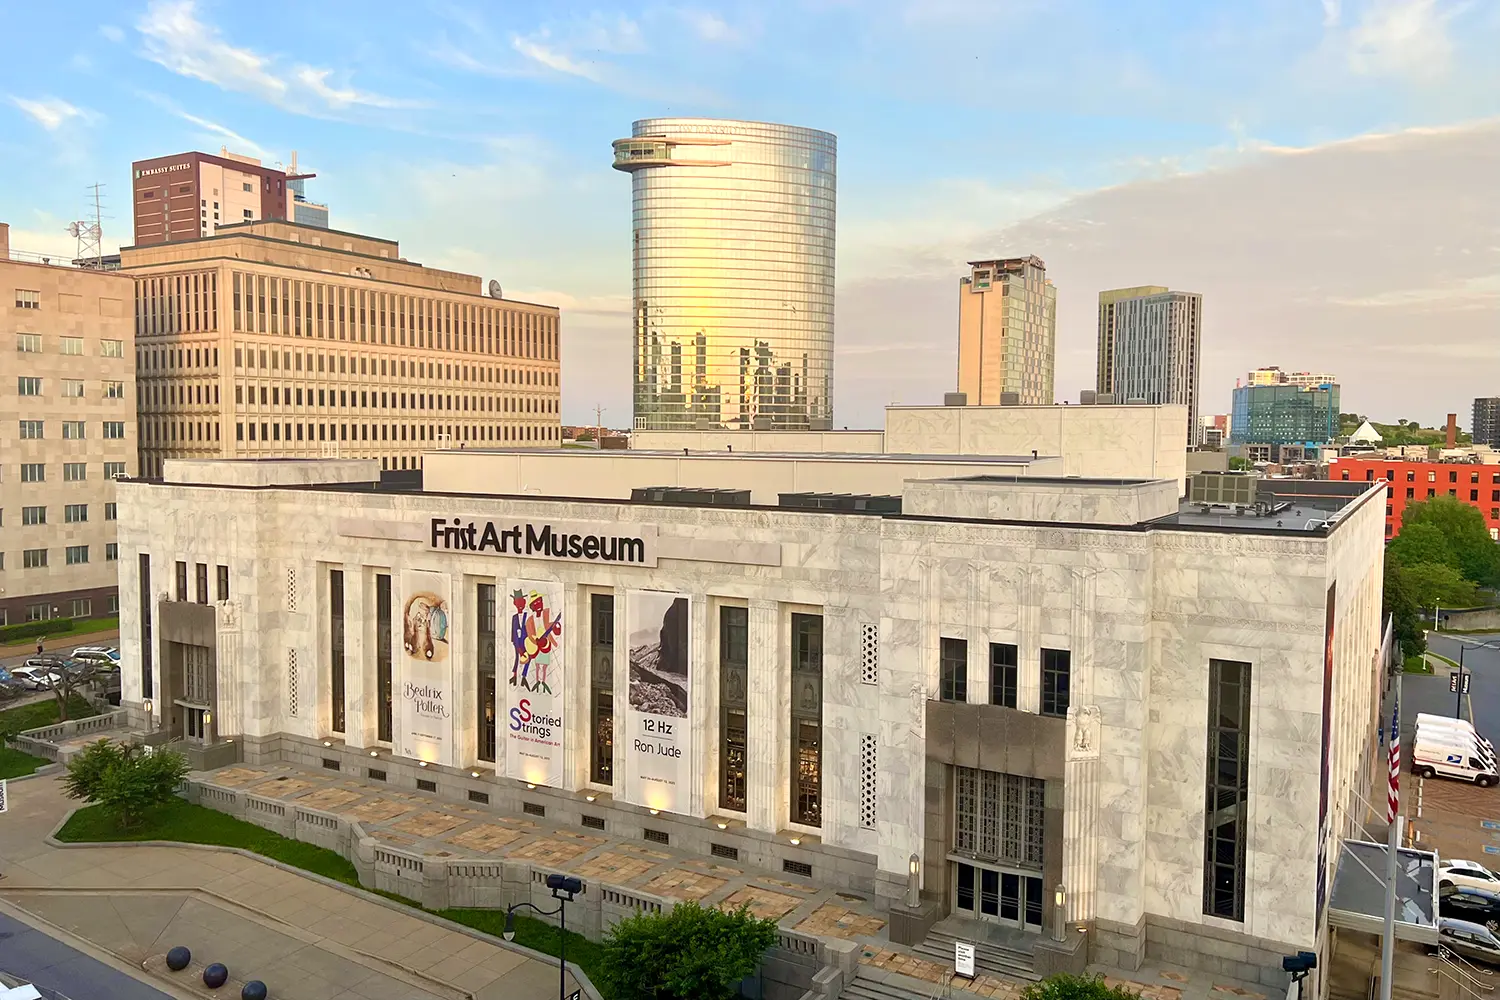 The Frist Art Museum in downtown Nashville, TN